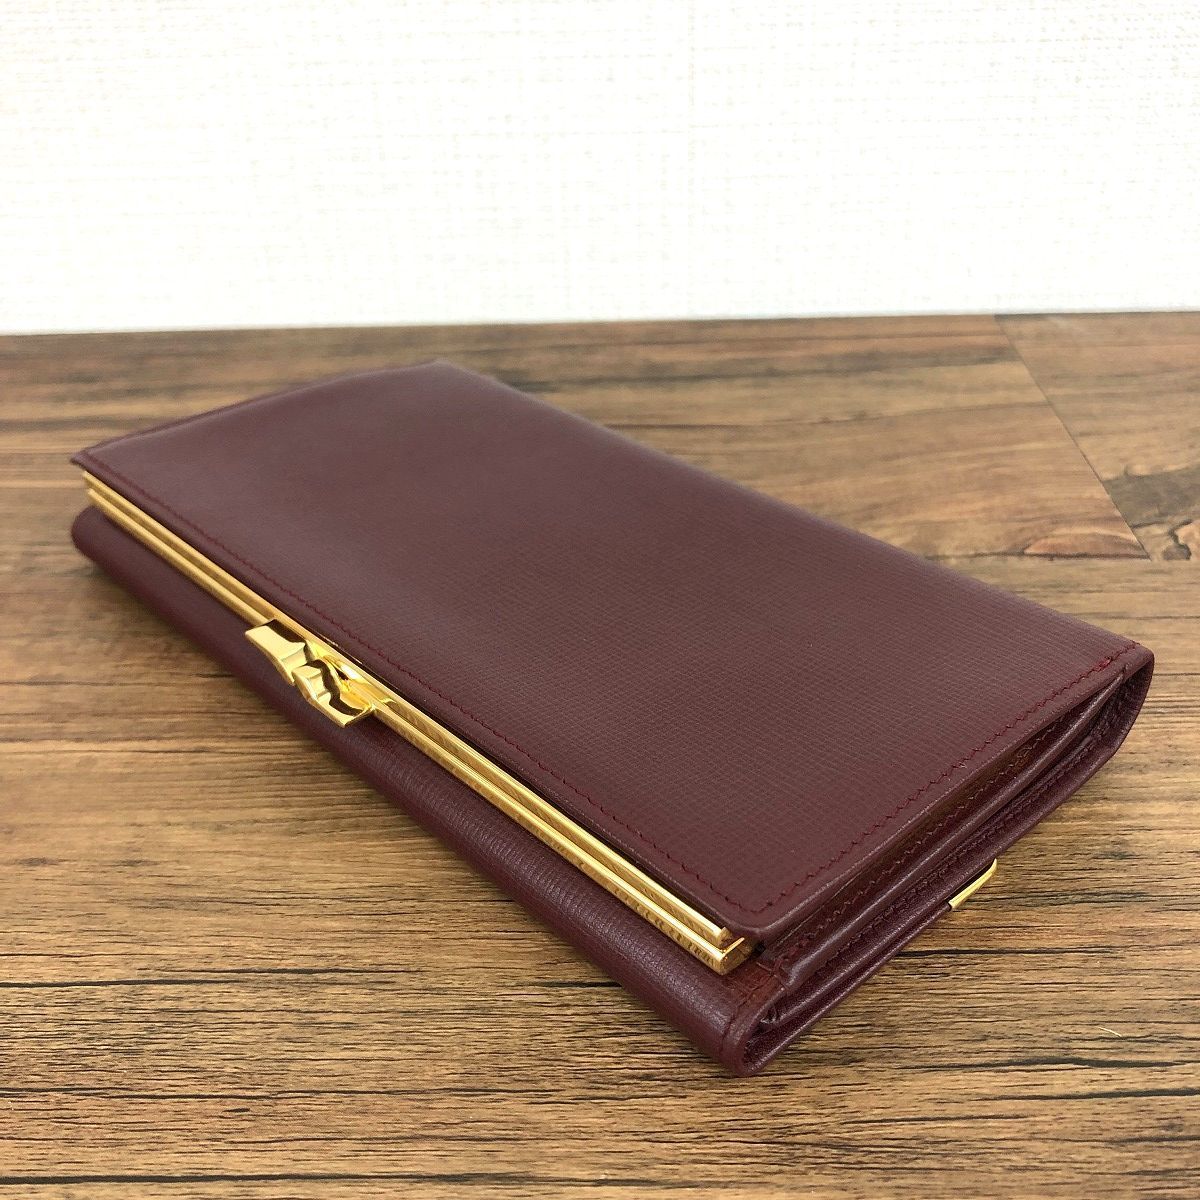 * free shipping * unused goods Cartier long wallet L3000164 bordeaux bulrush . box attaching 347